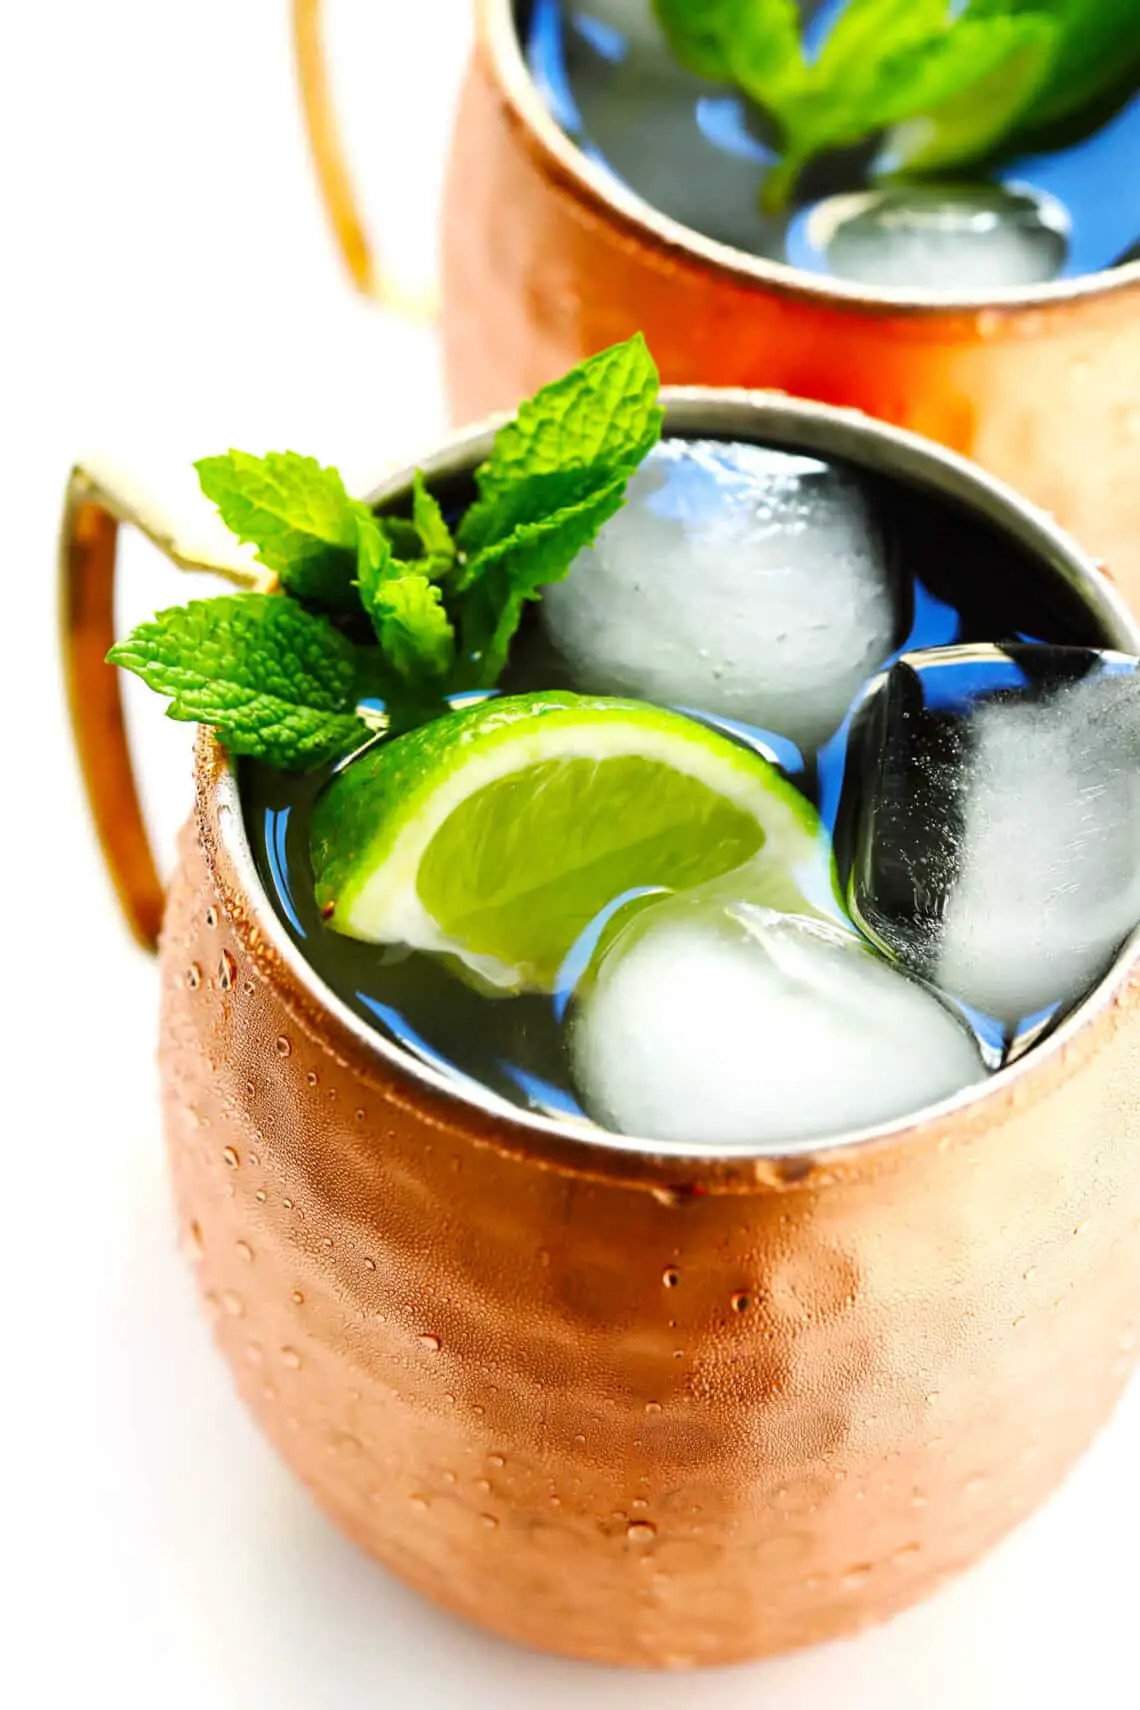 How To Make A Moscow Mule Recipe 4 1 8420440 1140x1710